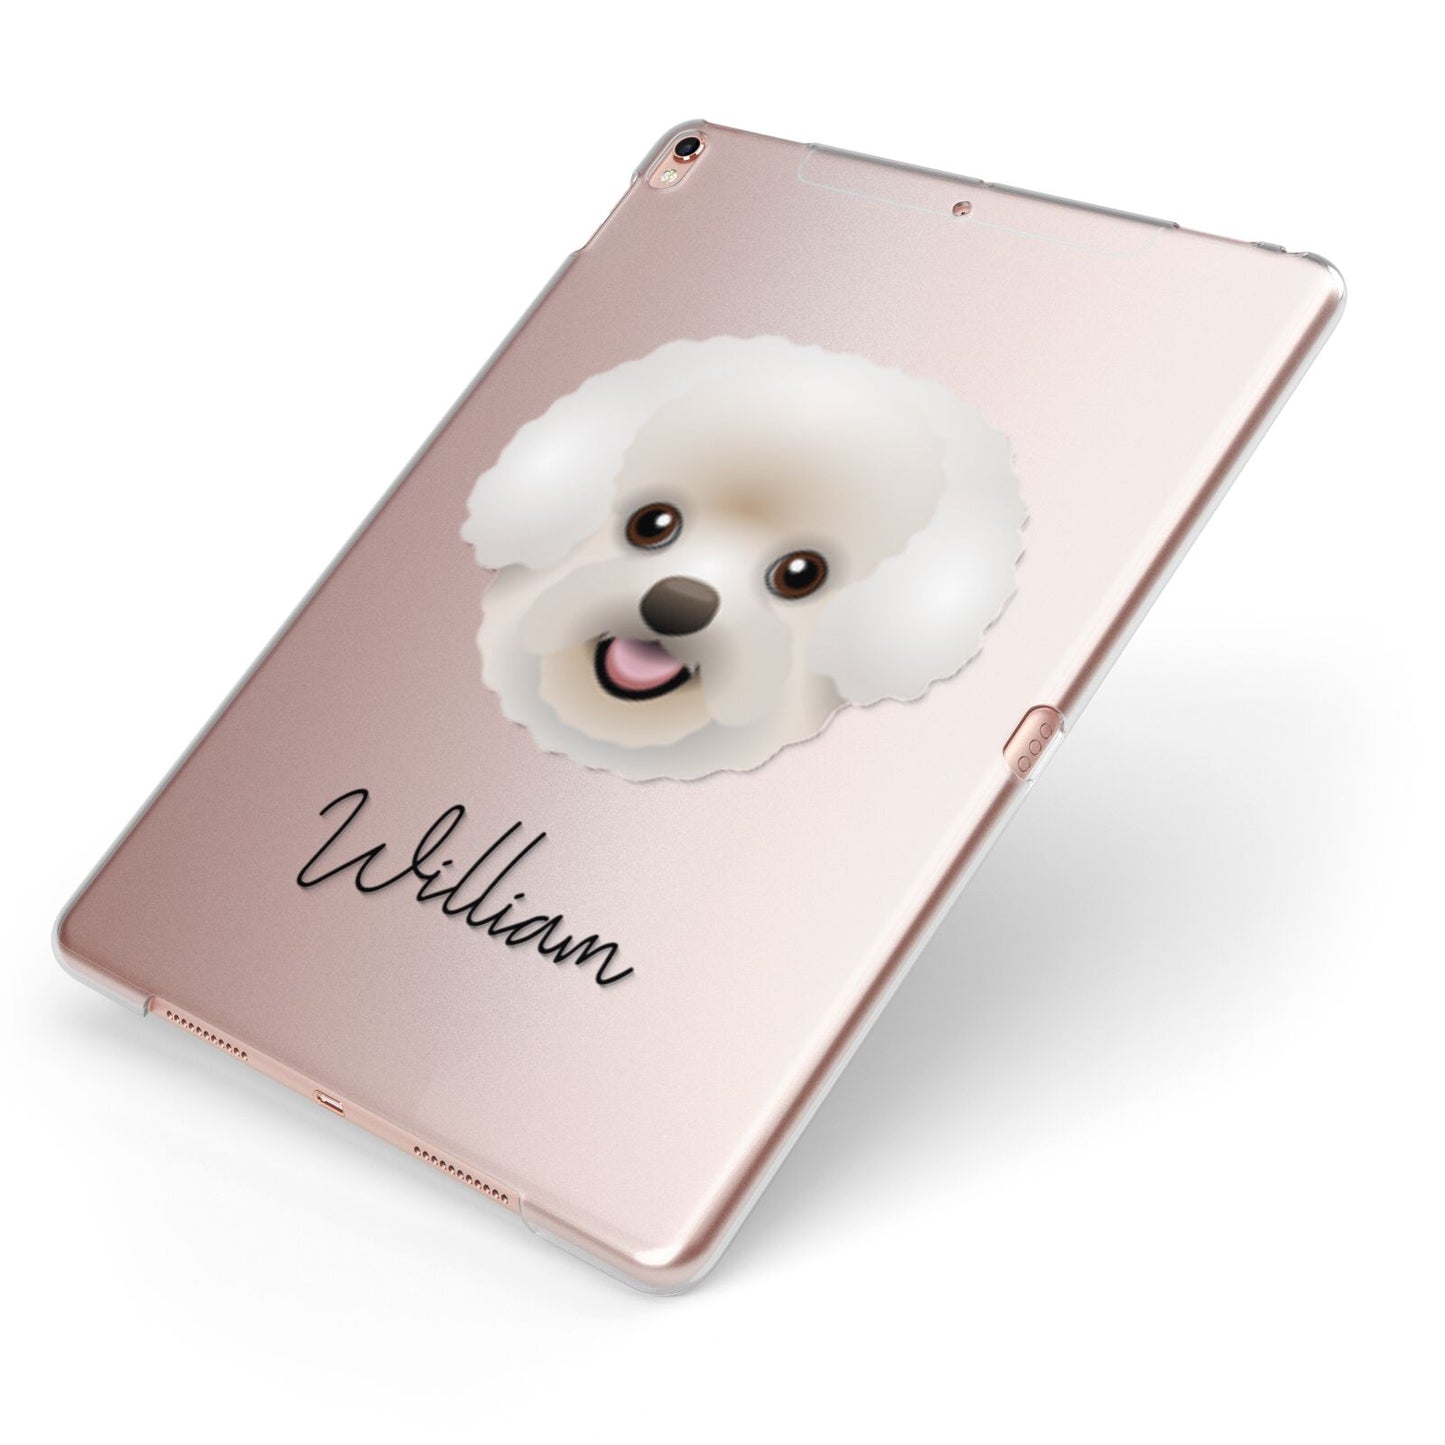 Bichon Frise Personalised Apple iPad Case on Rose Gold iPad Side View